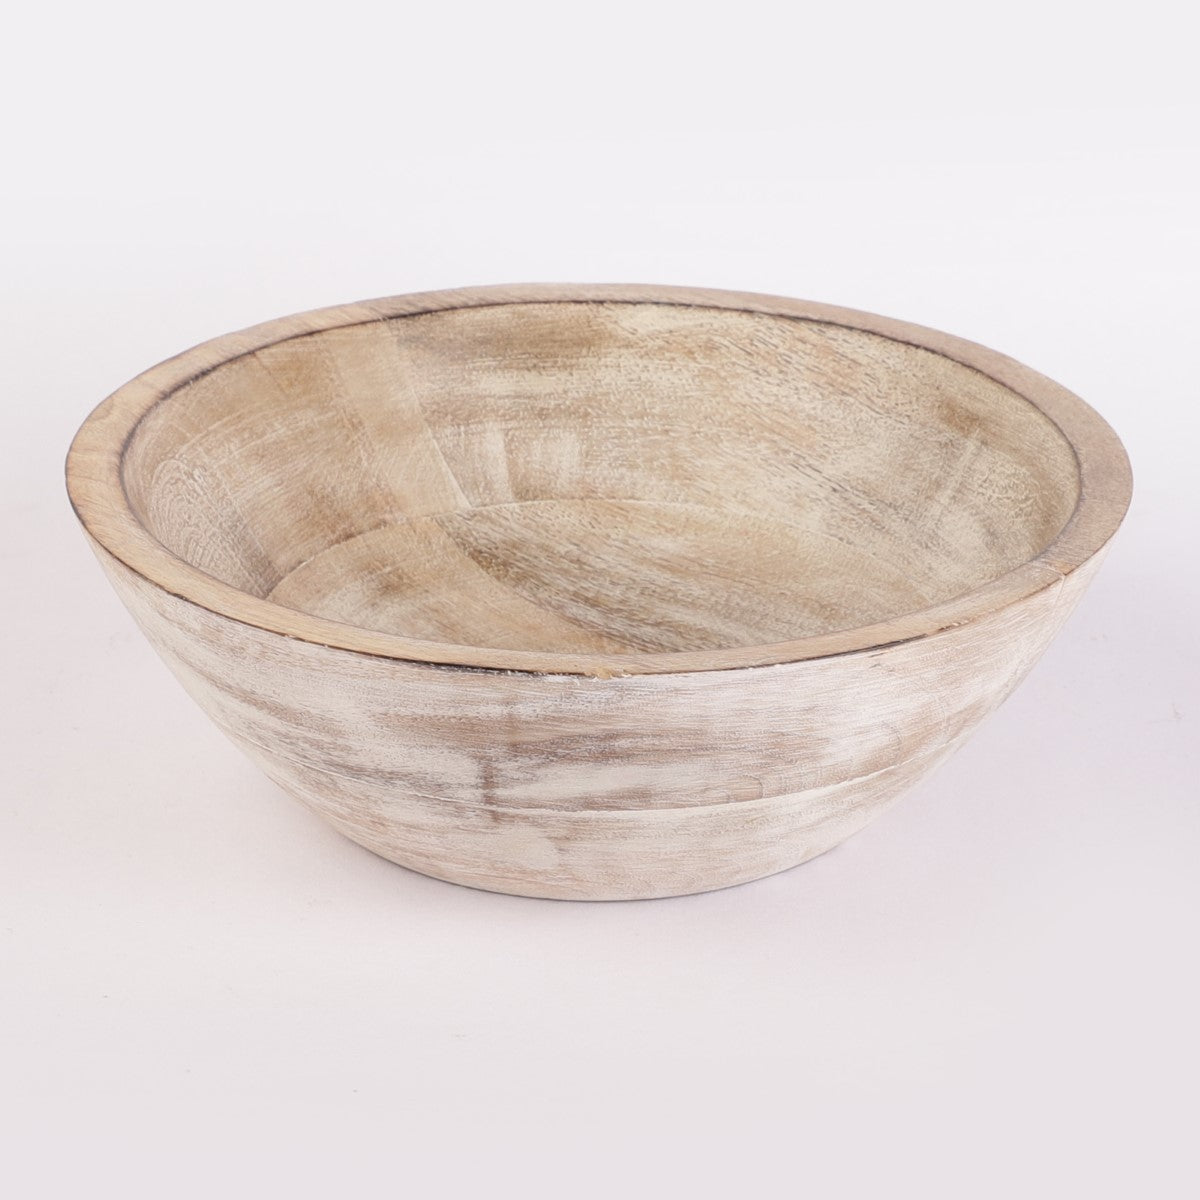 Handcrafted Wooden Salad Bowl